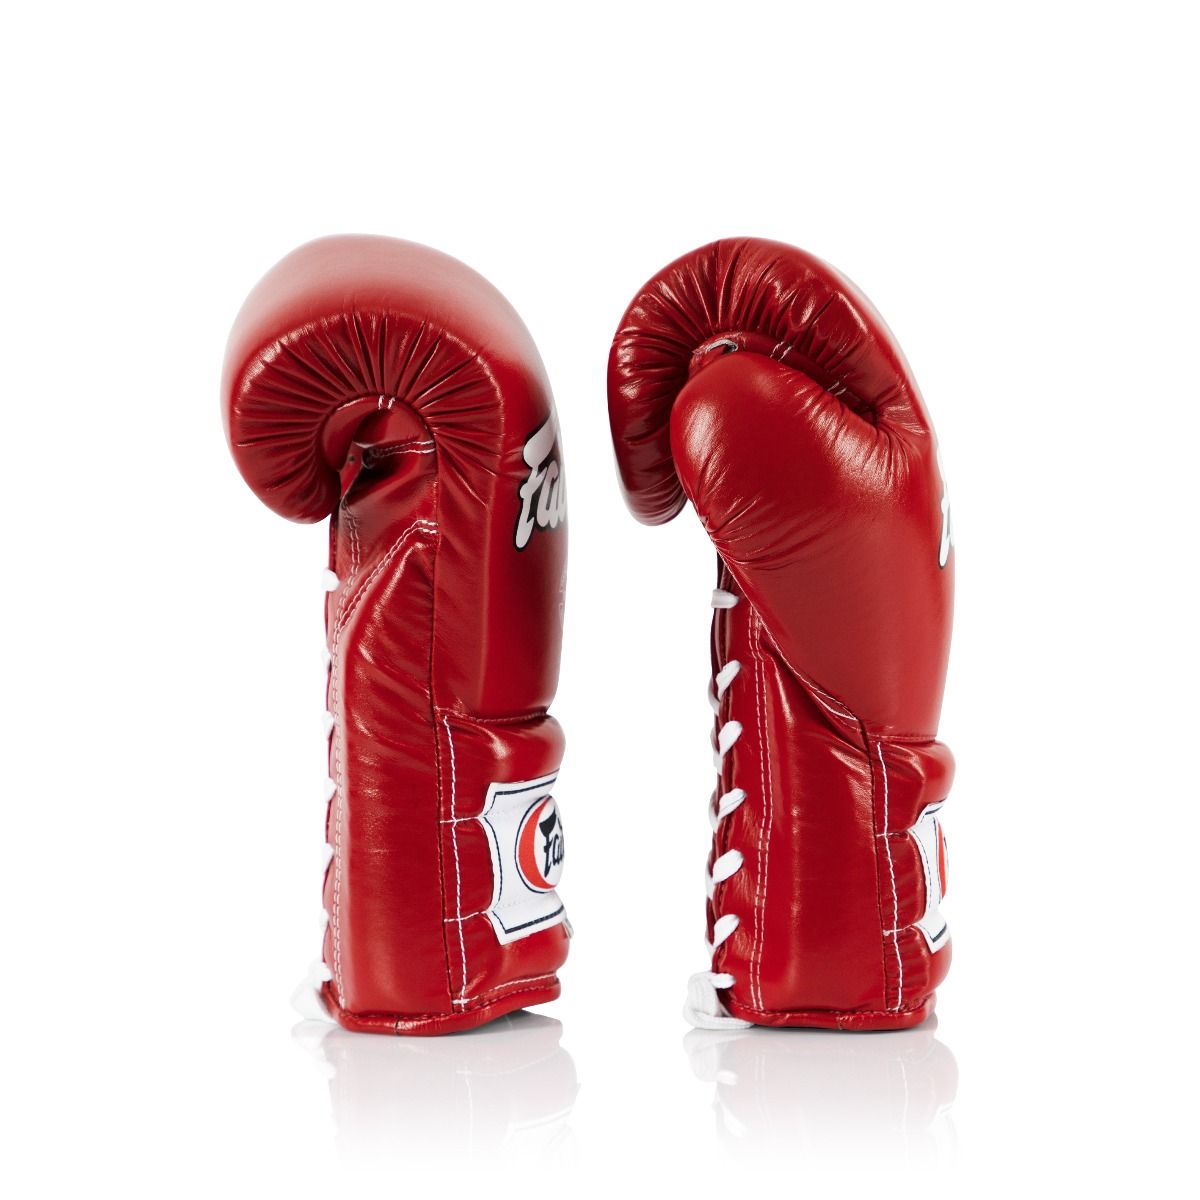 FAIRTEX GLOVES BGL7 LEATHER LACE-UP PRO TRAINING MEXICAN STYLE